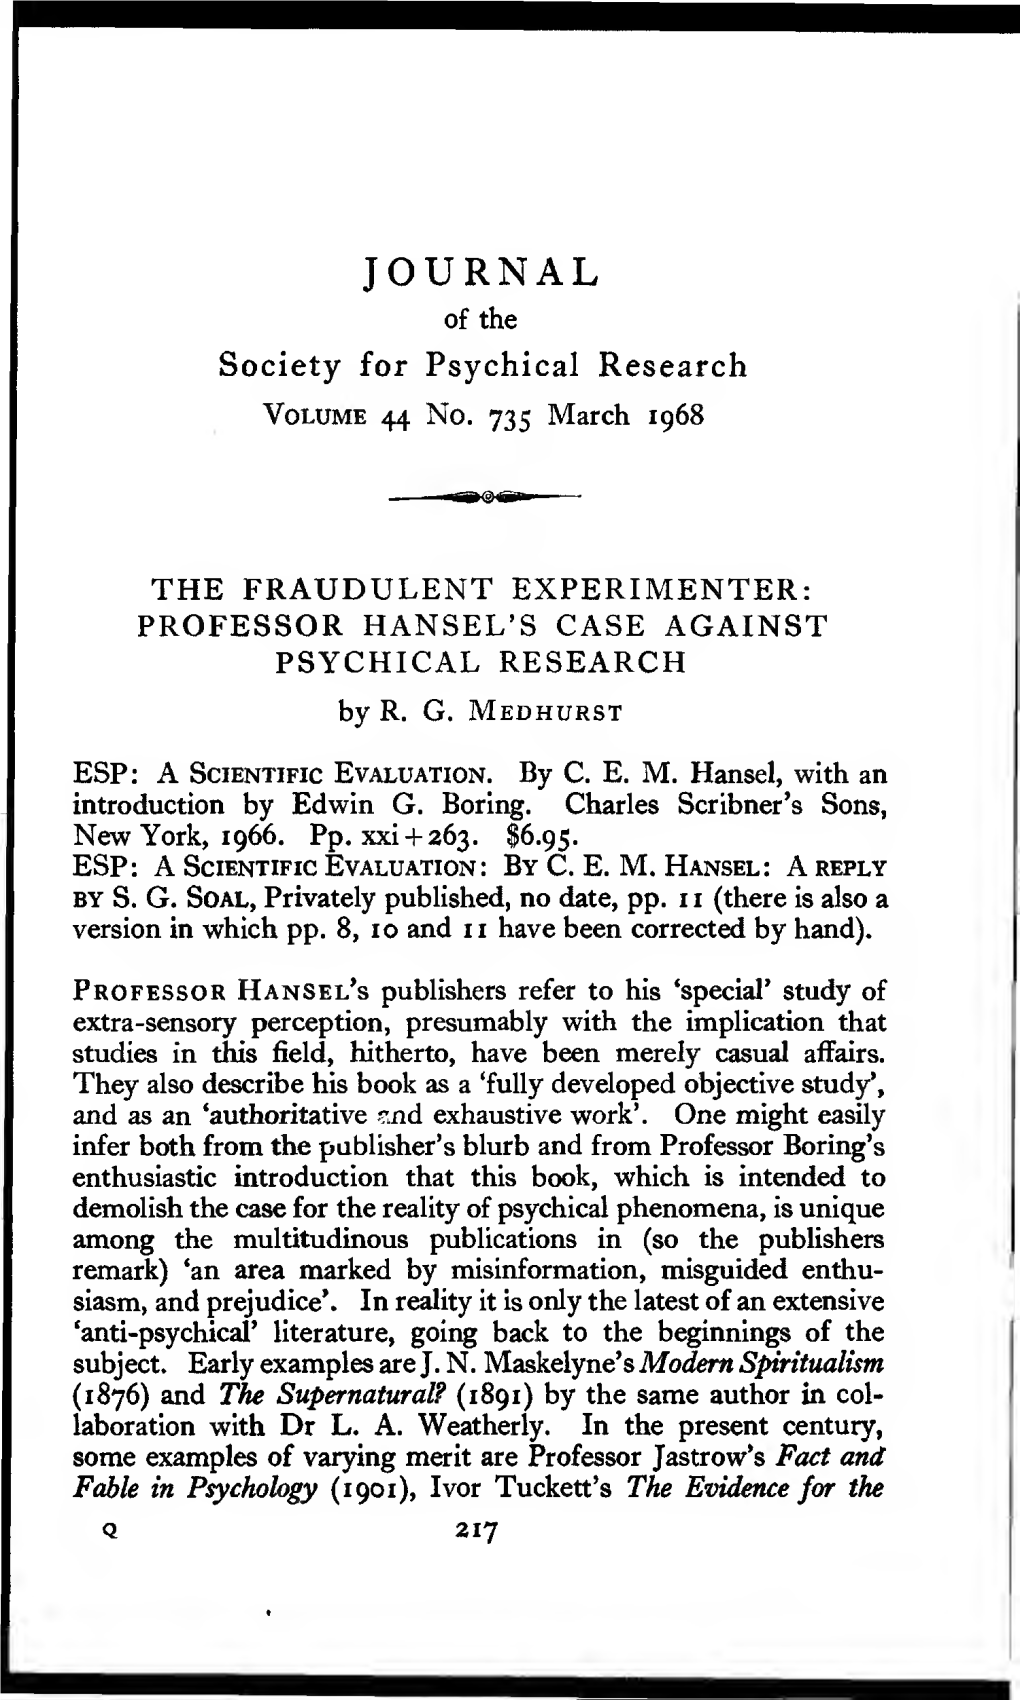 The Fraudulent Experimenter: Professor Hansel's Case Against Psychical Research